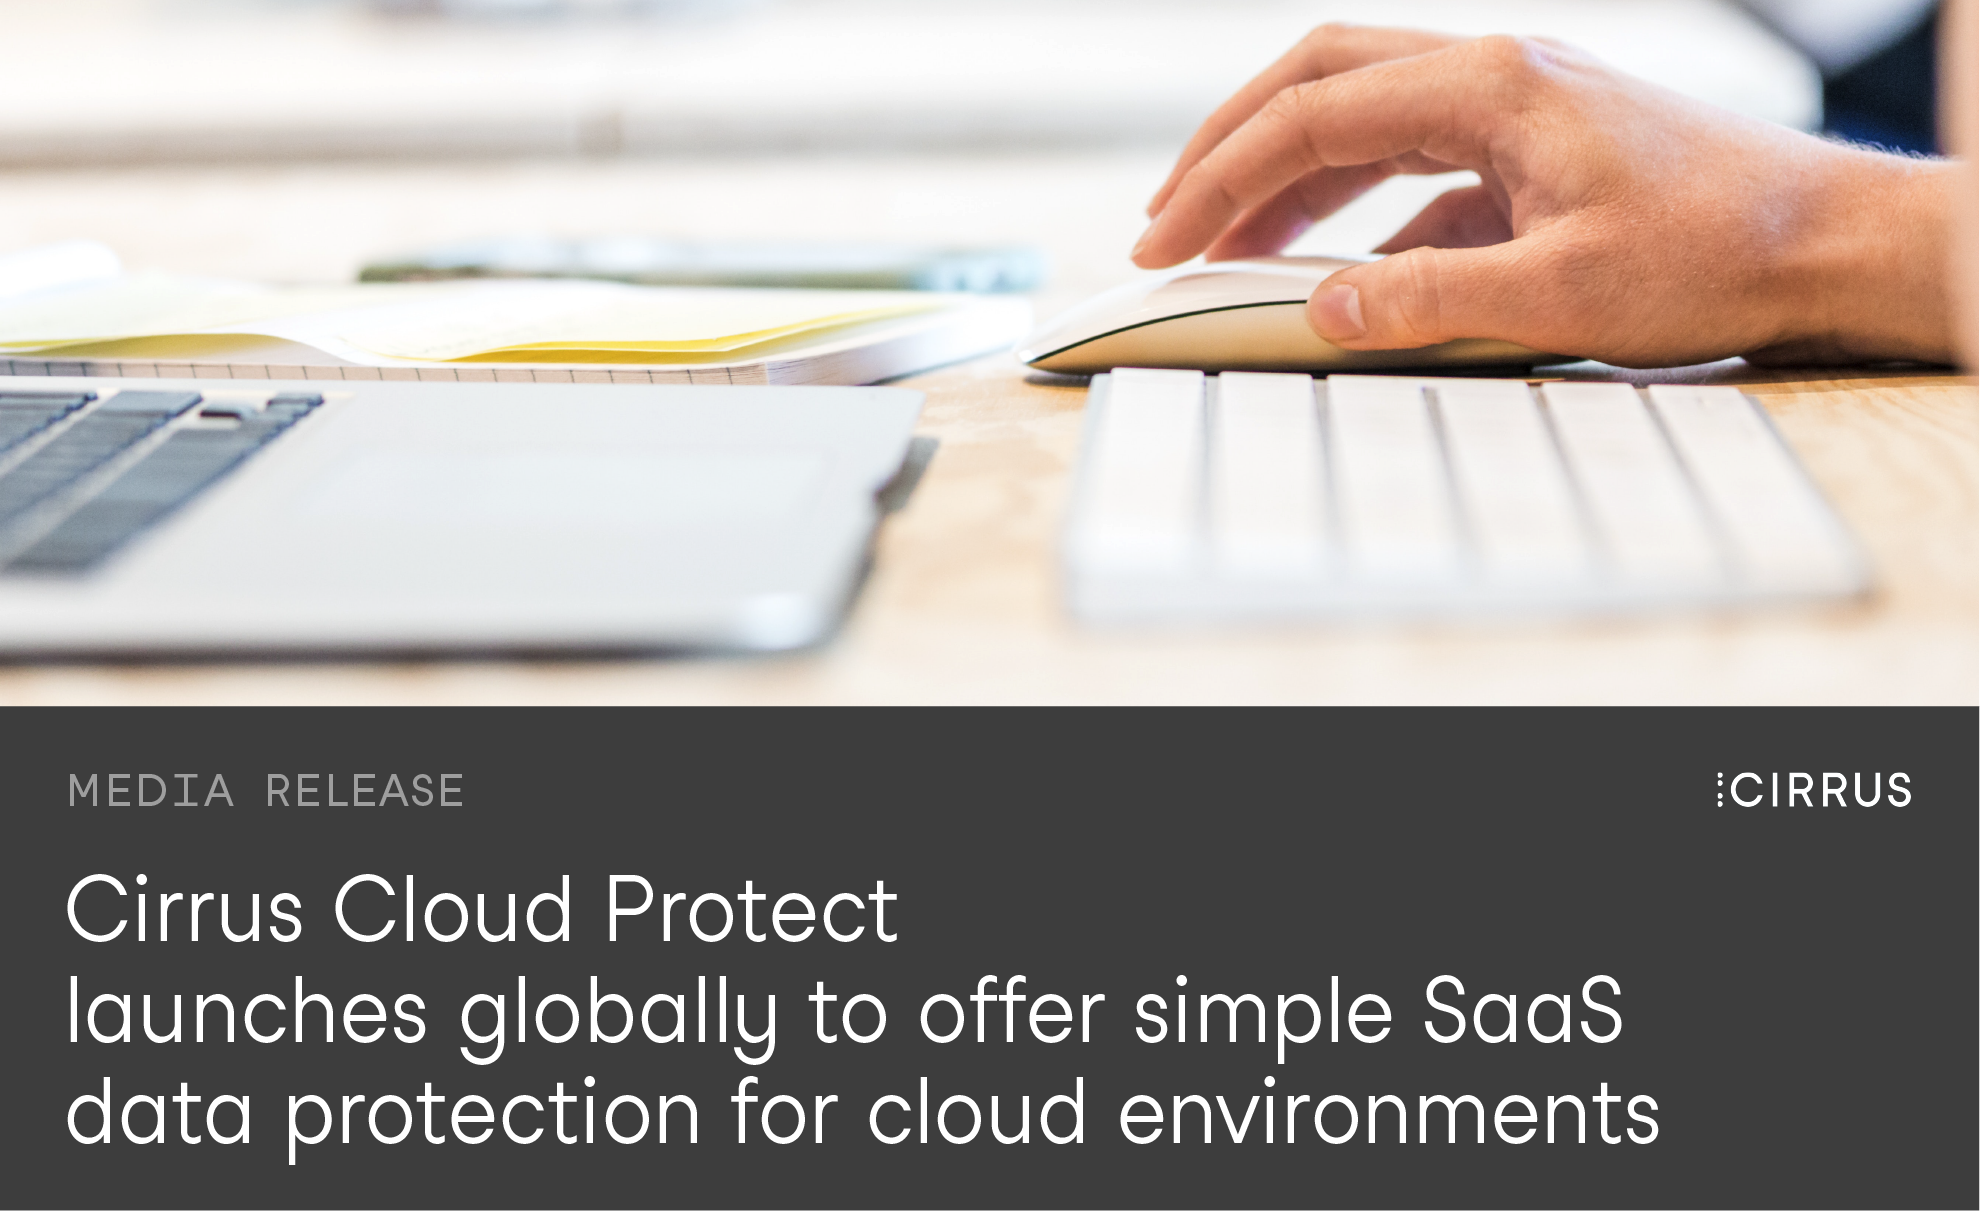 Cirrus Cloud Protect launches globally to offer simple SaaS data protection for cloud environments